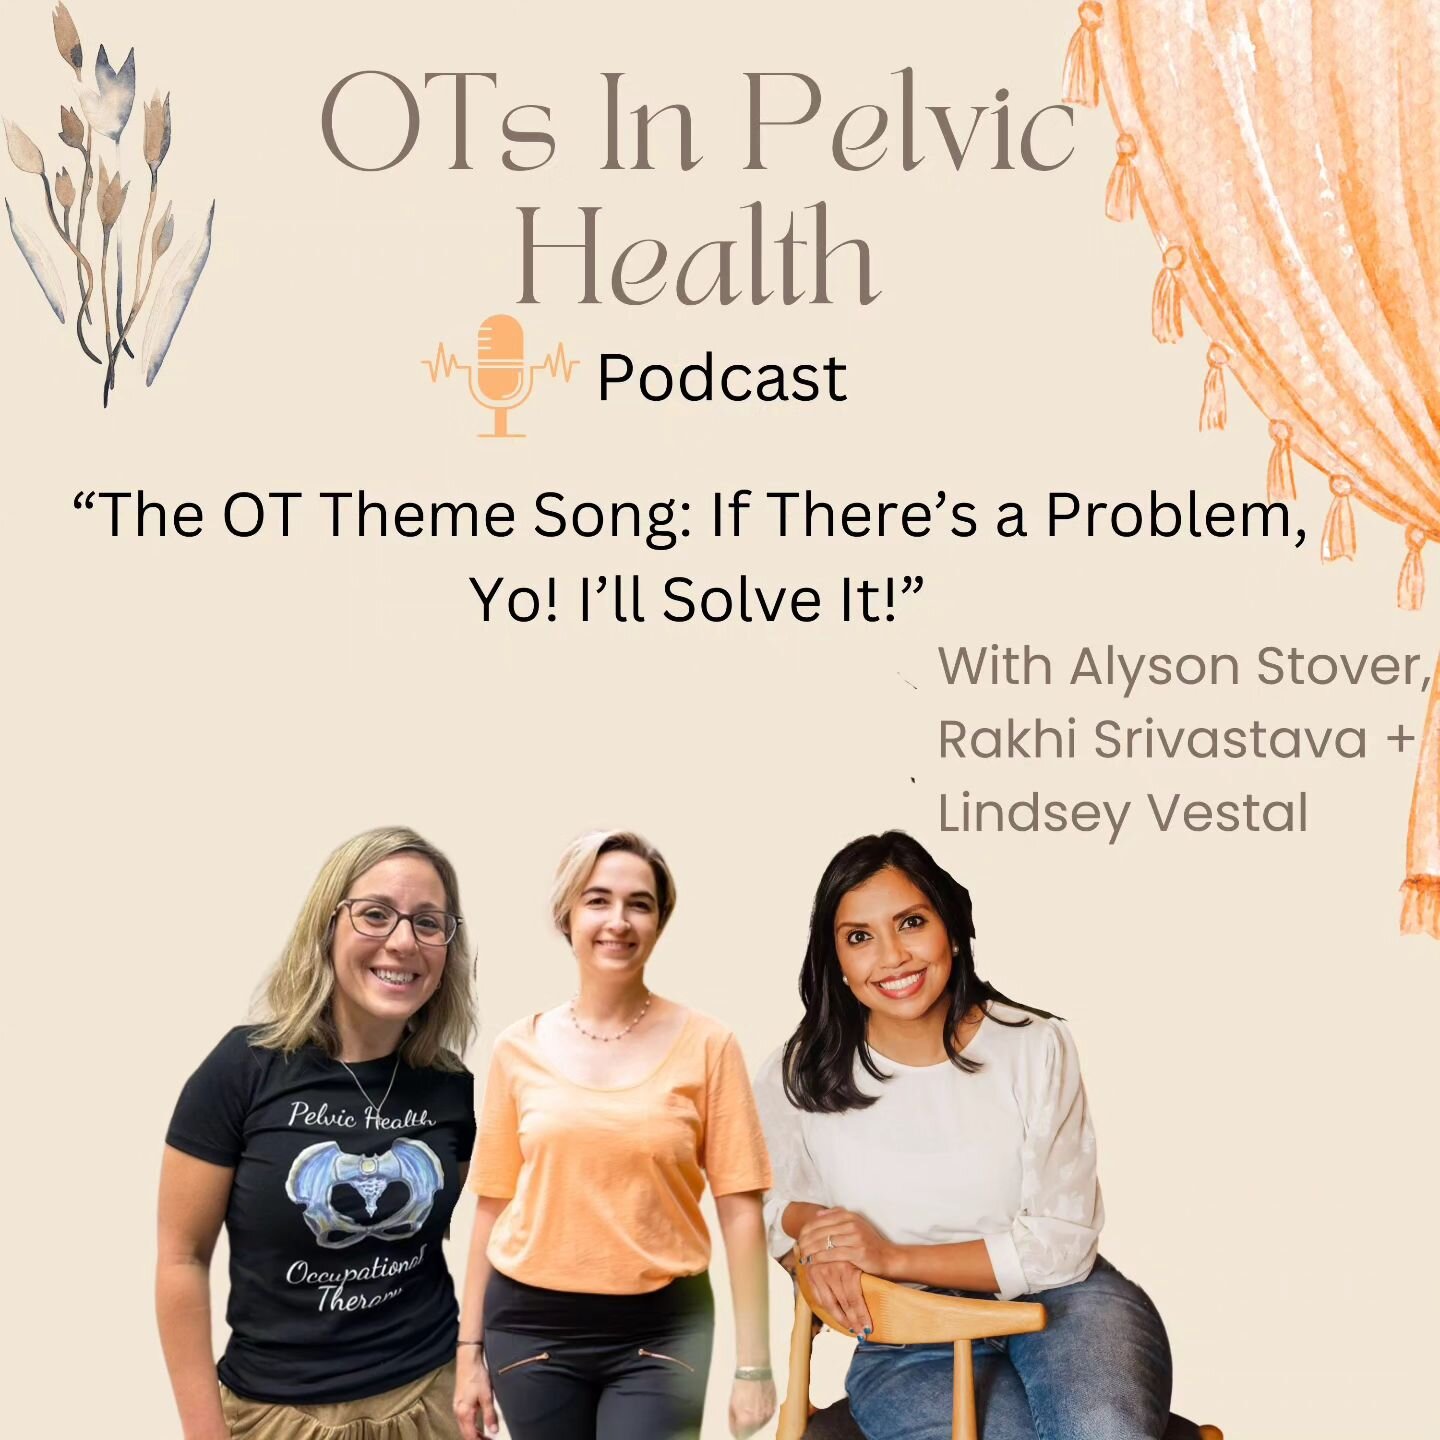 QCPH owner Rakhi was so pleased to join @alyson.d.stover, President of the American Occupational Therapy Association, as a guest on the OTs in Pelvic Health Podcast with host Lindsey Vestal of @functionalpelvis. Check out how Rakhi's description of w